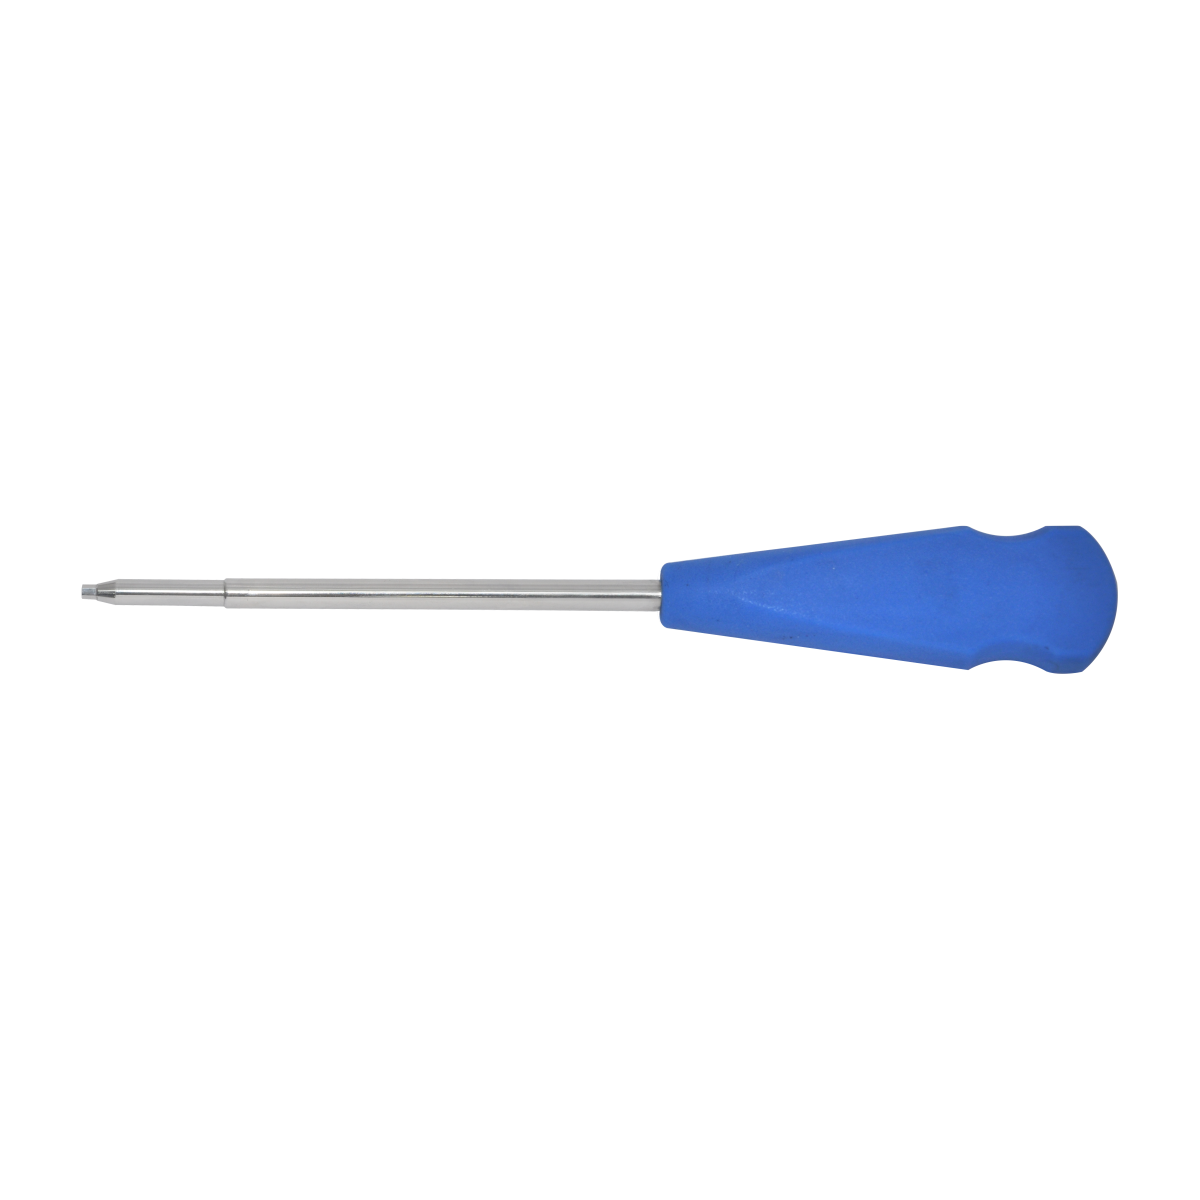 Hexagonal-Screw-Driver-2.5mm-Tip-Silicon-Handle